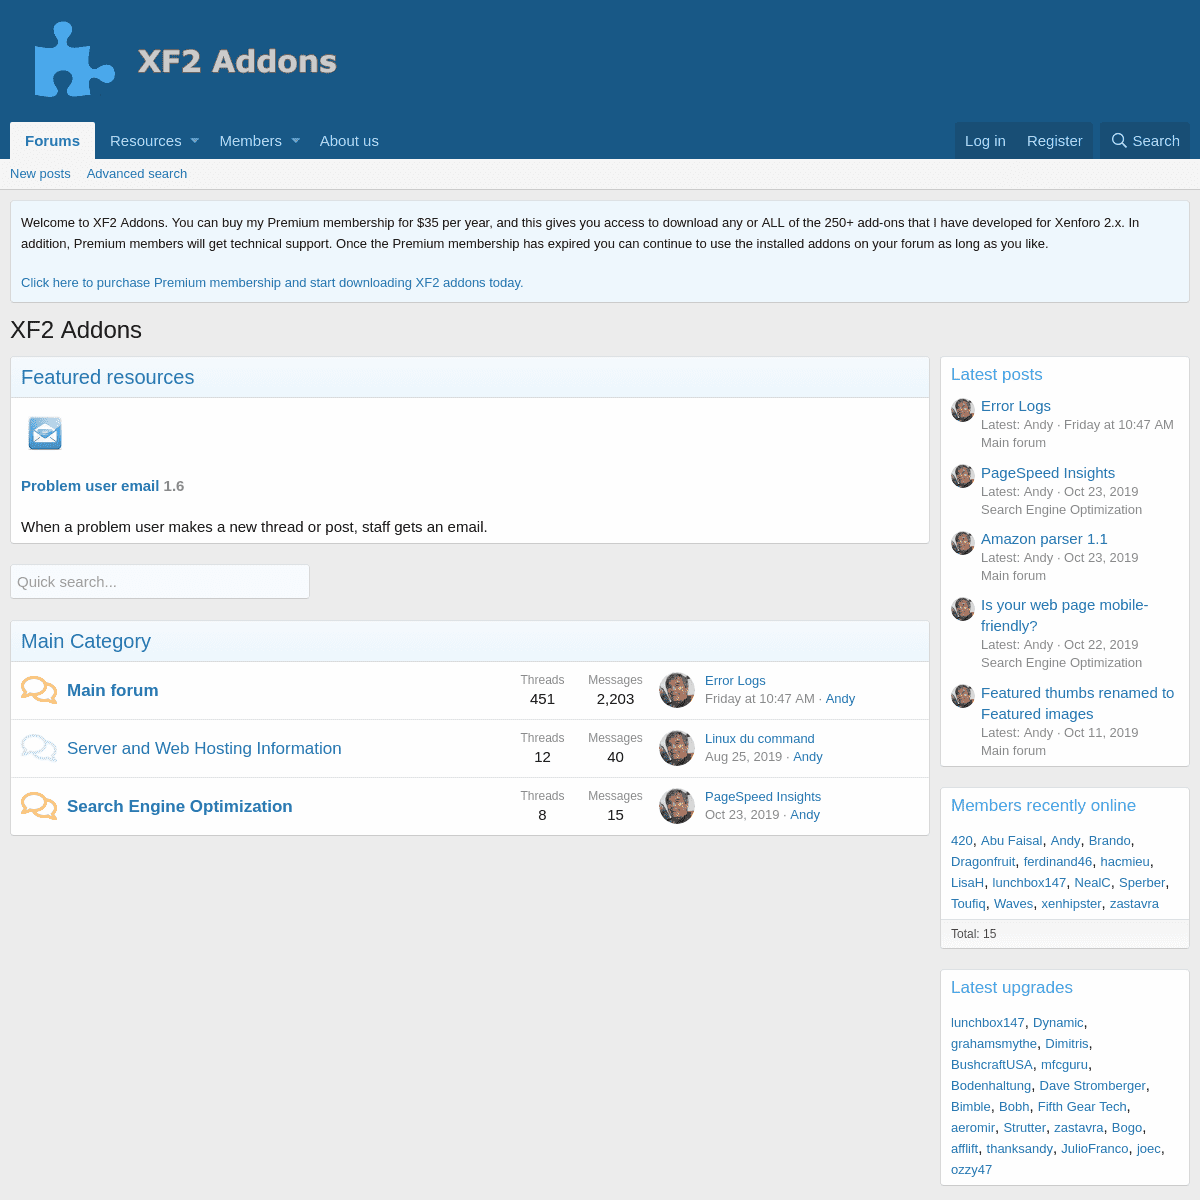 A complete backup of xf2addons.com